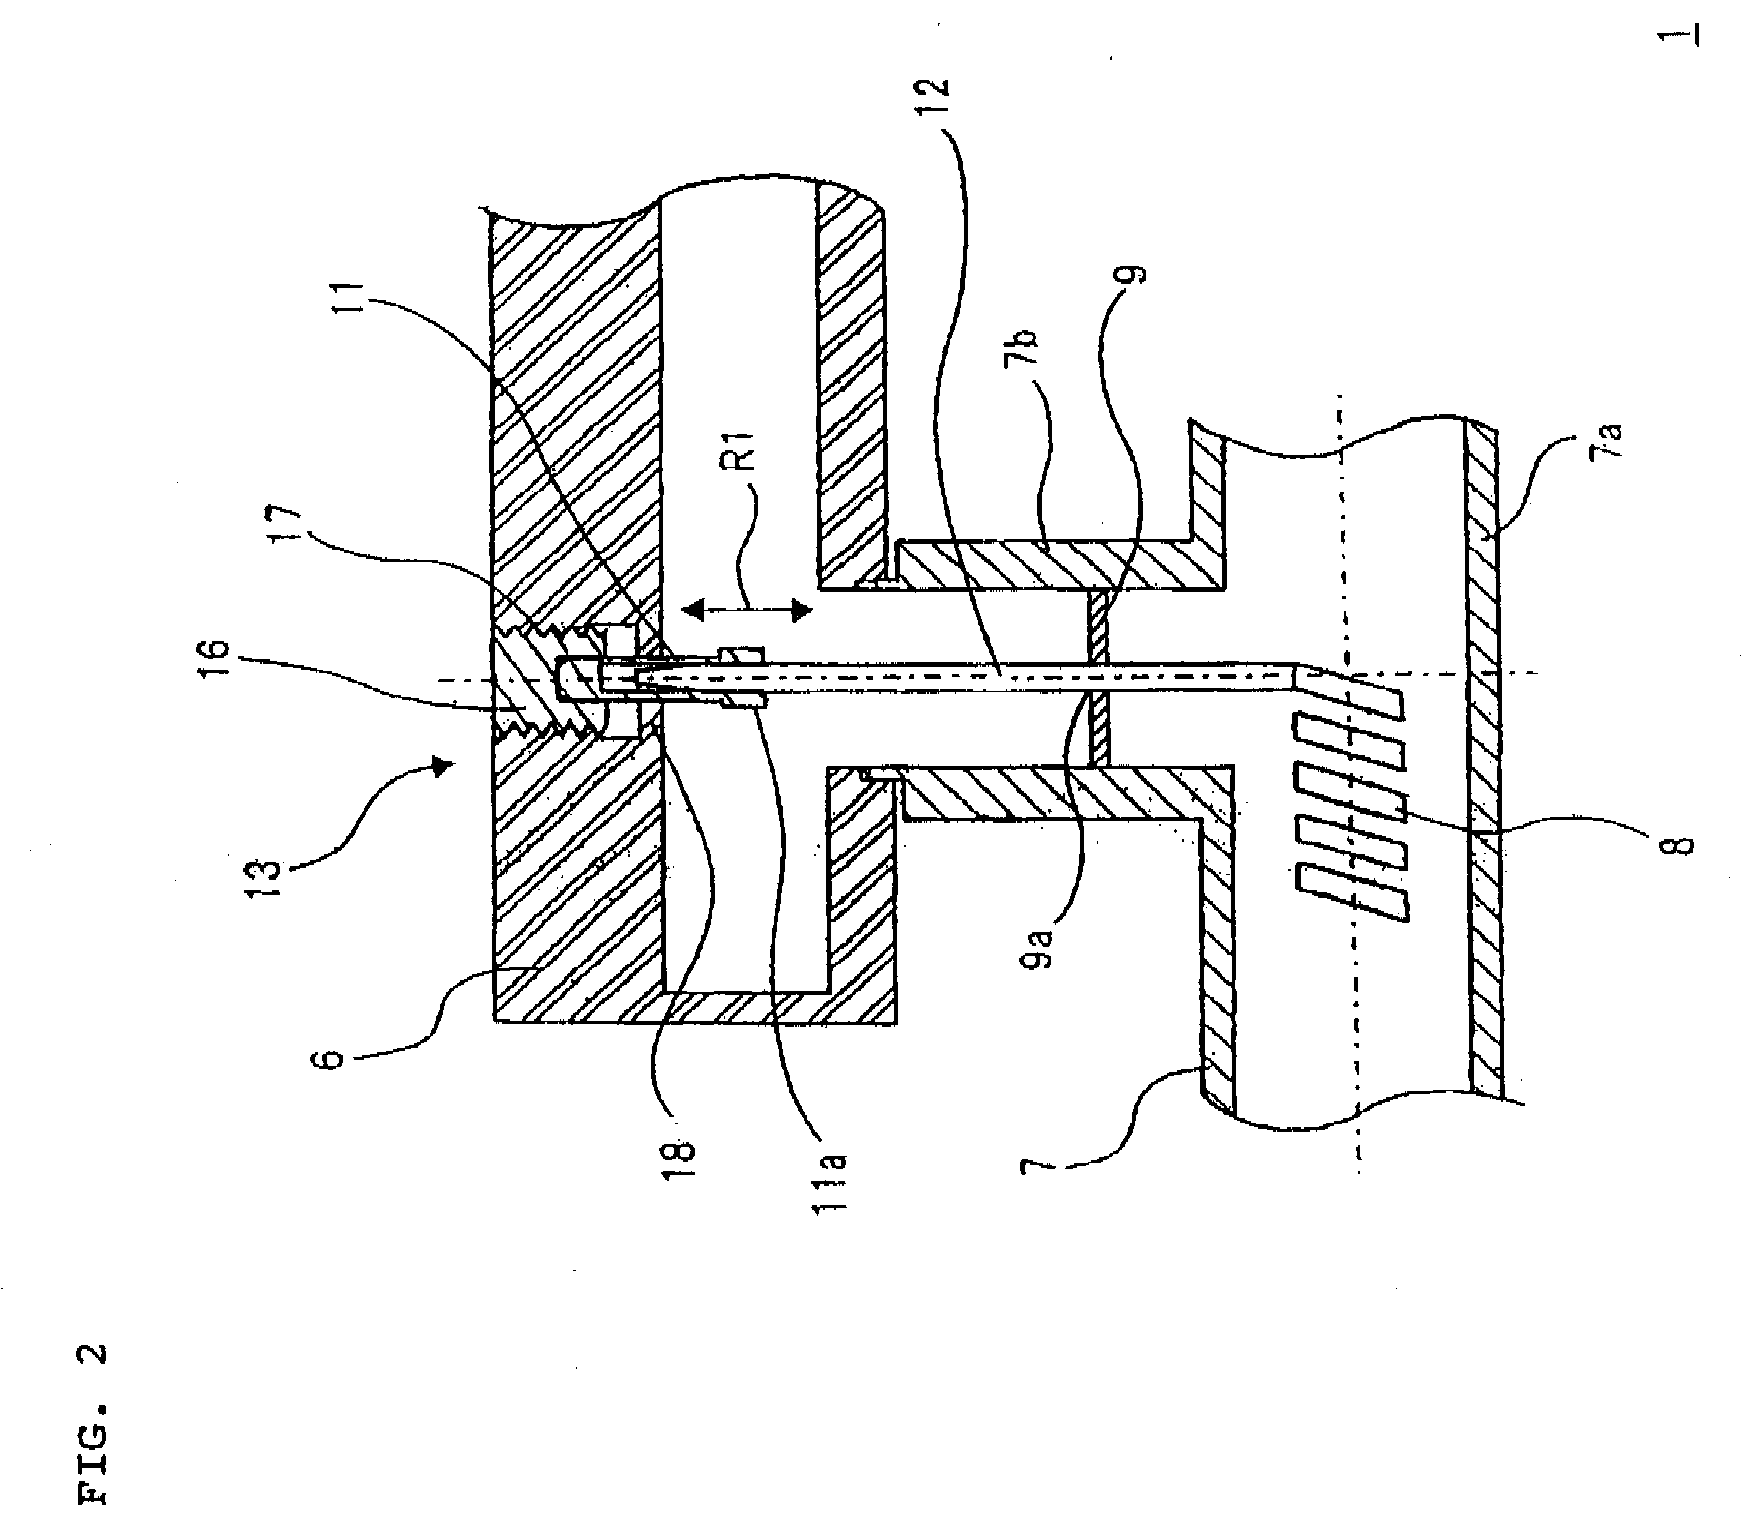 Structure of coaxial-to-waveguide transition and traveling wave tube